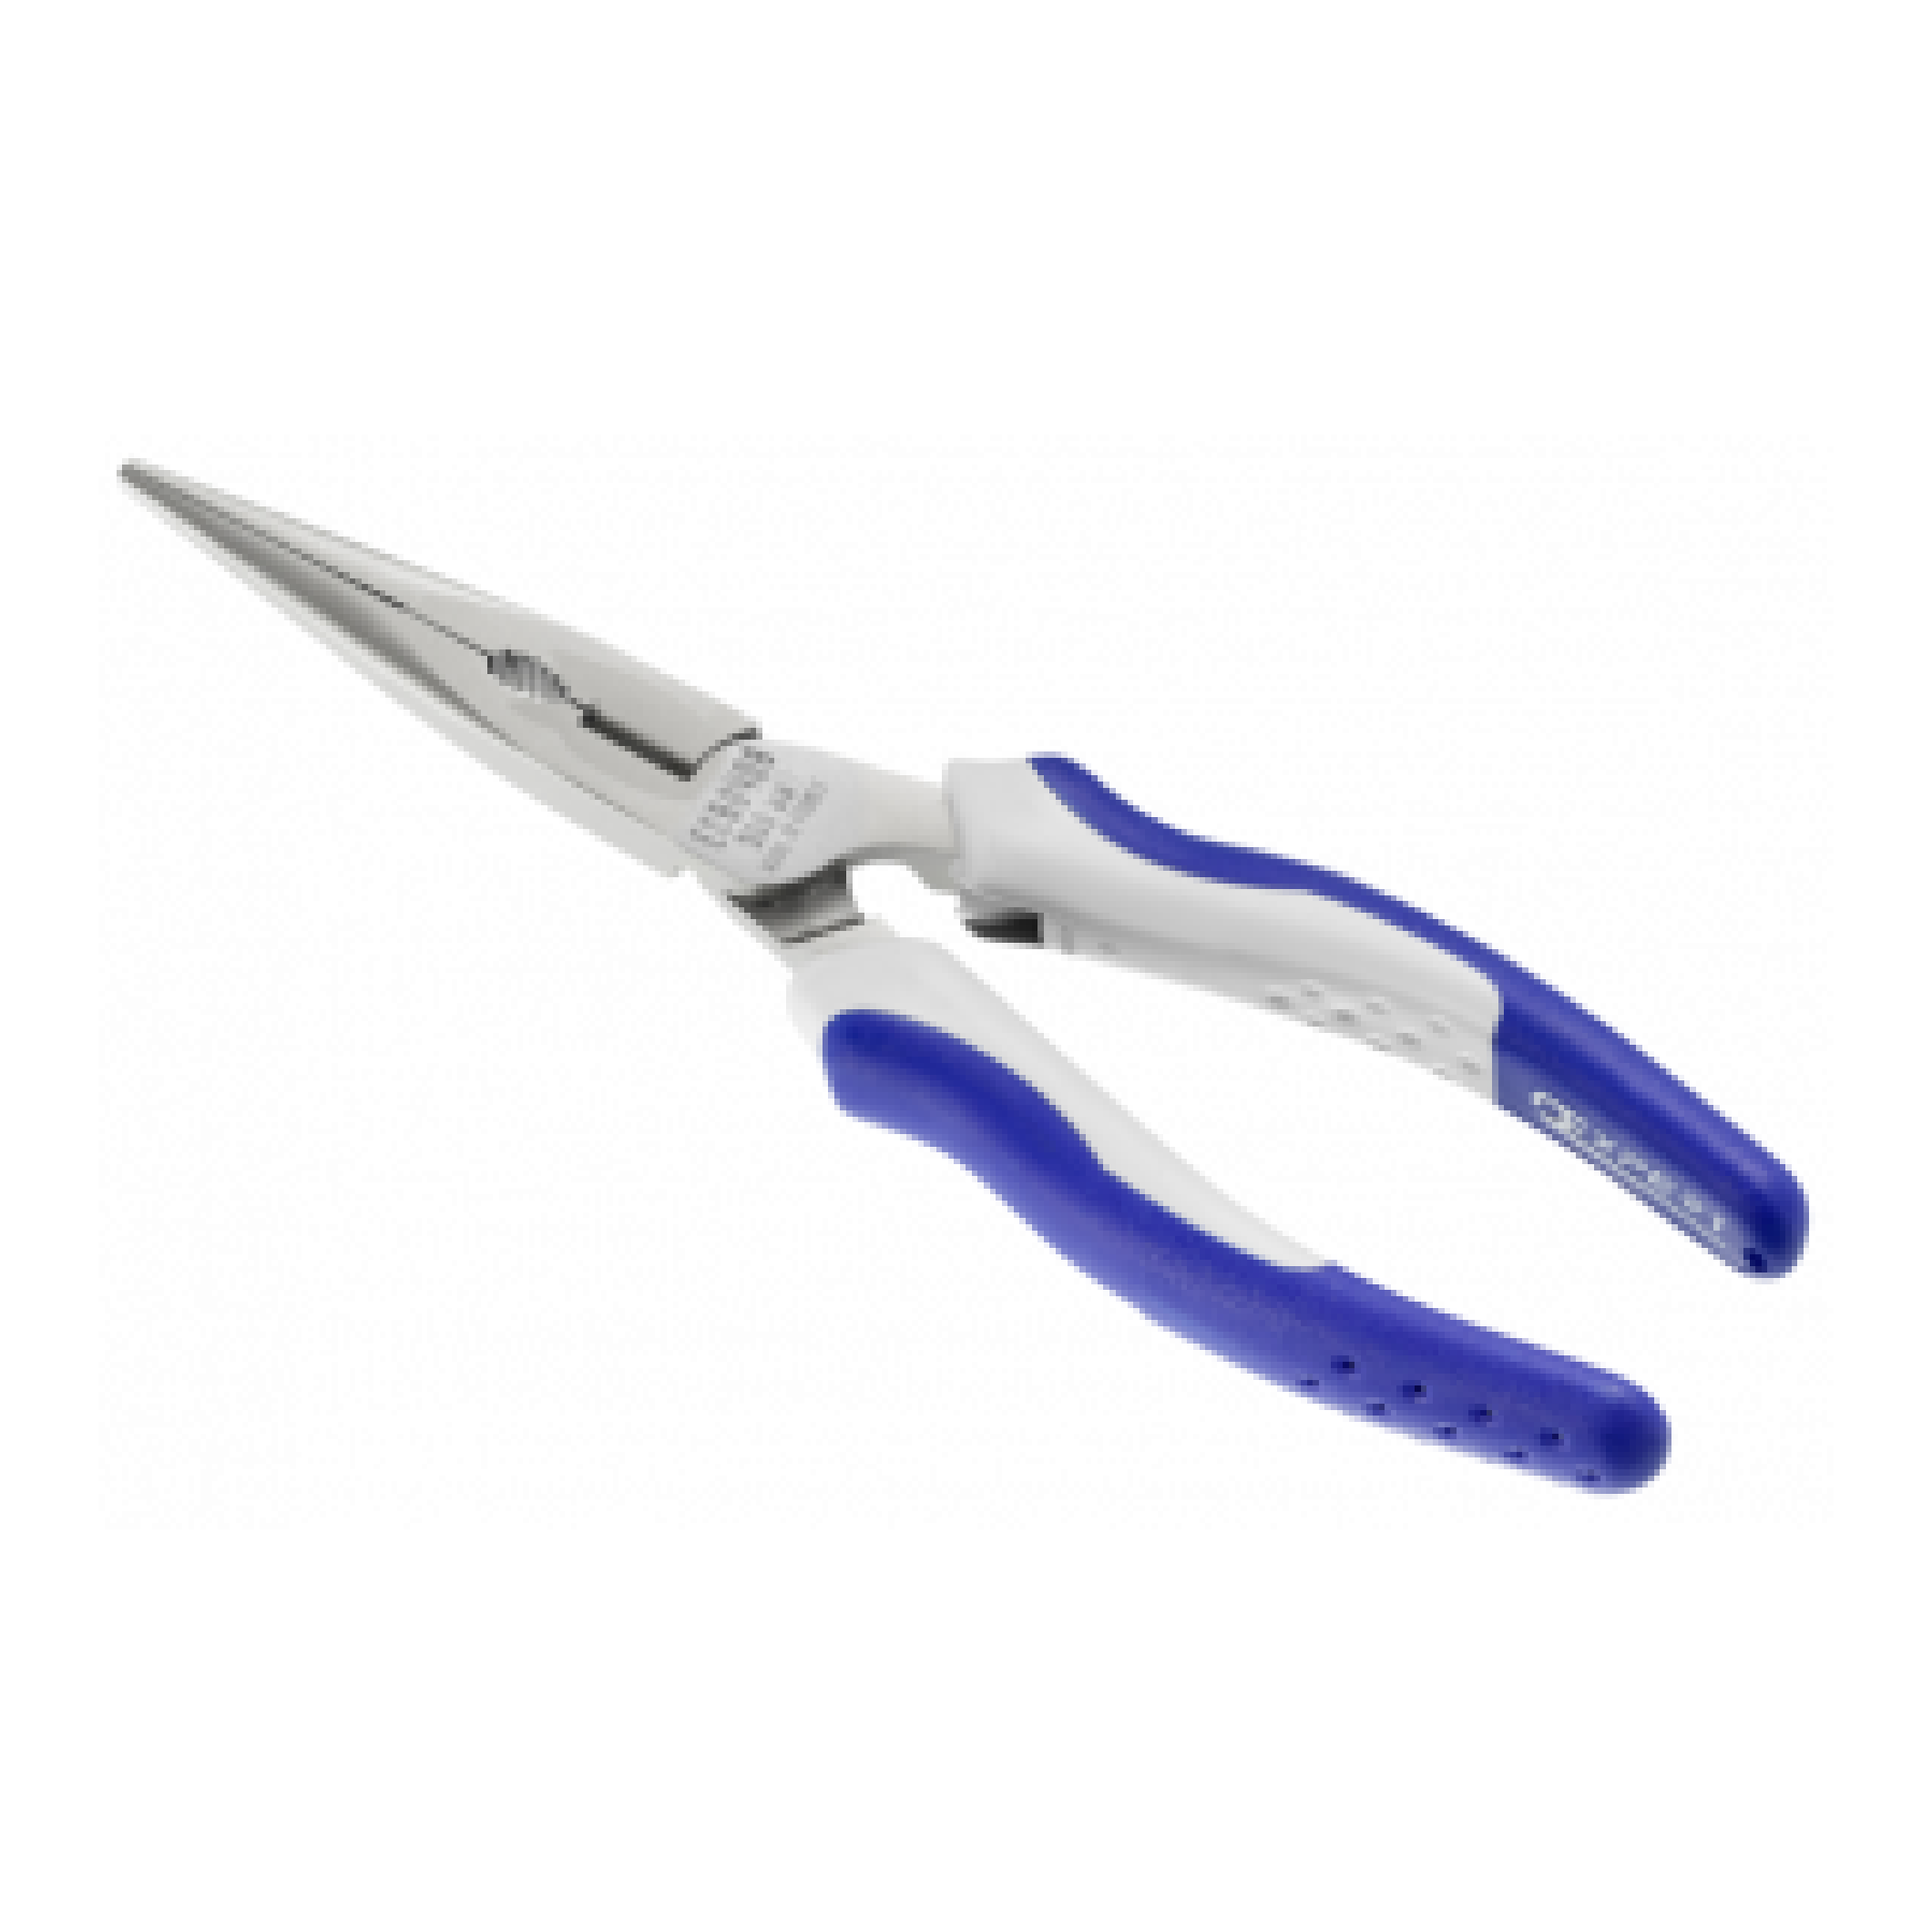 EXPERT E080407 - Straight Nose 1/2 Round.Pliers-160mm